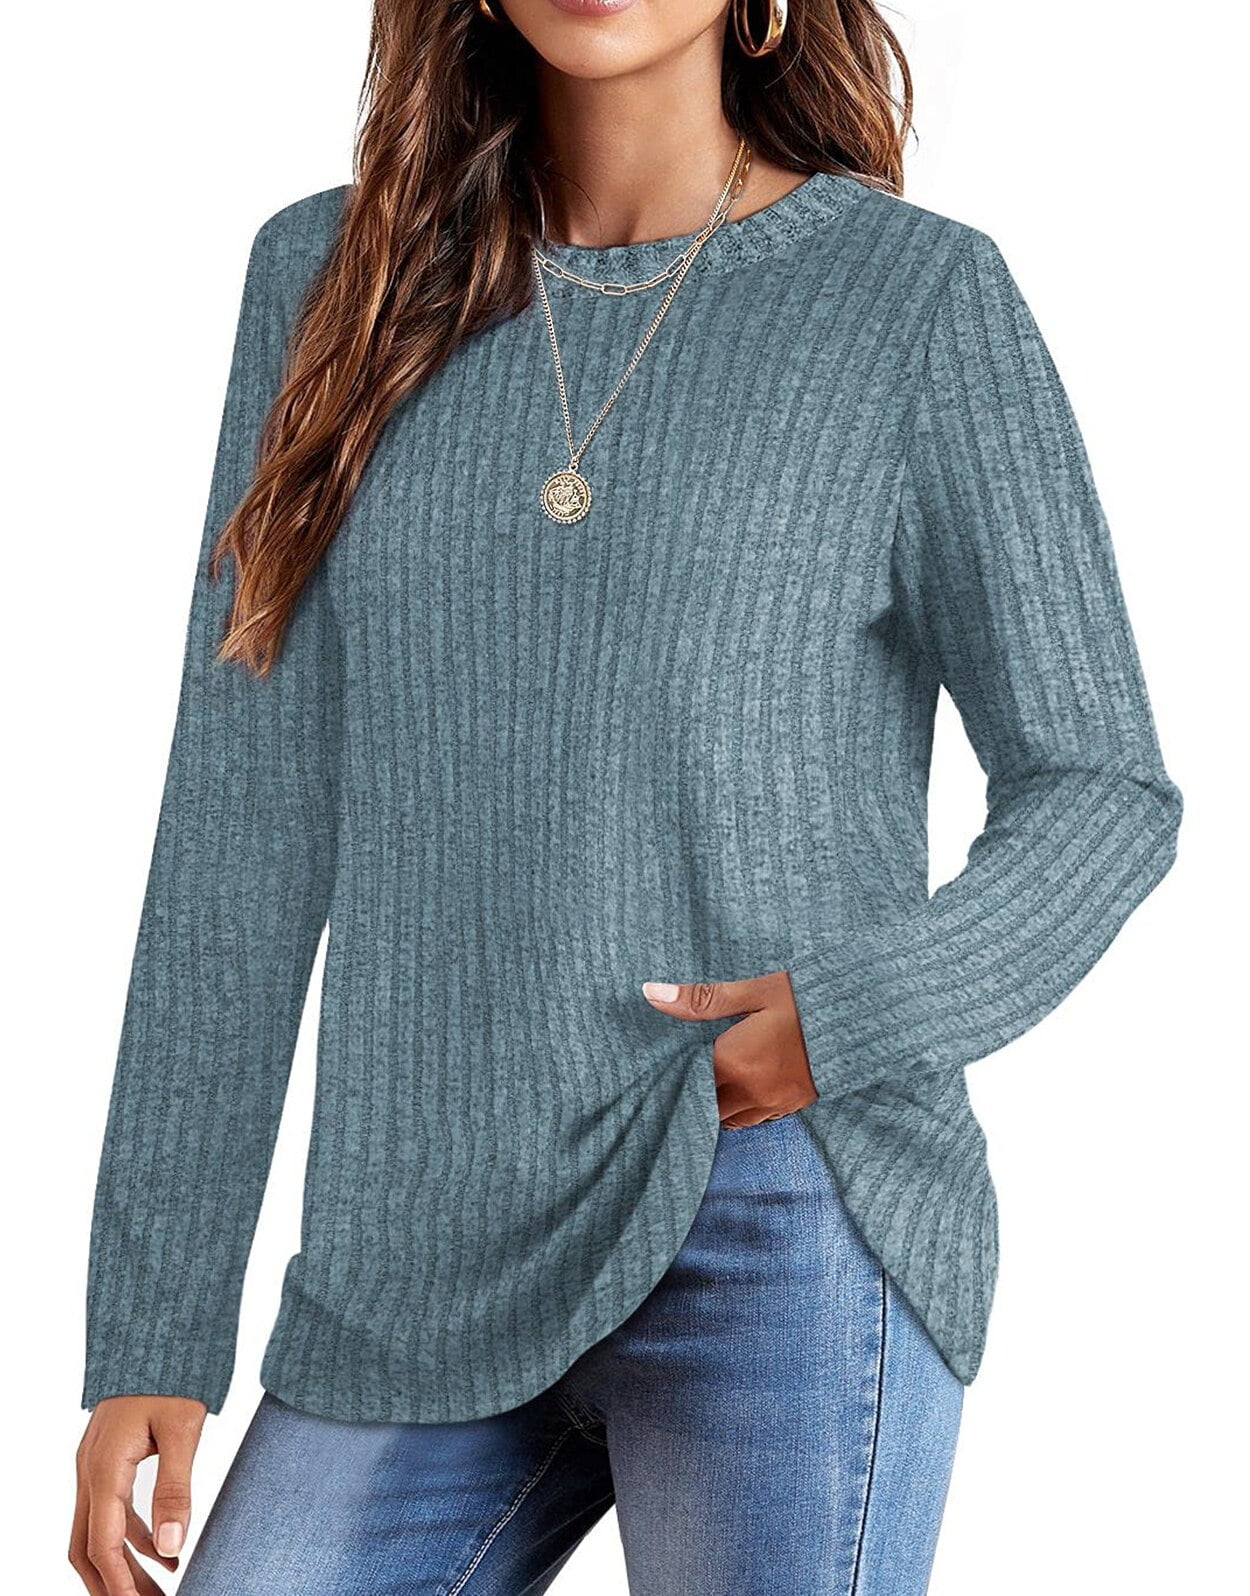 FchengtaiS Women's Casual Crew Neck Sweatshirt Loose Soft Long Sleeve  Pullover Tops Anthropologie Dupes Clothing Comfy Clothes at  Women's  Clothing store